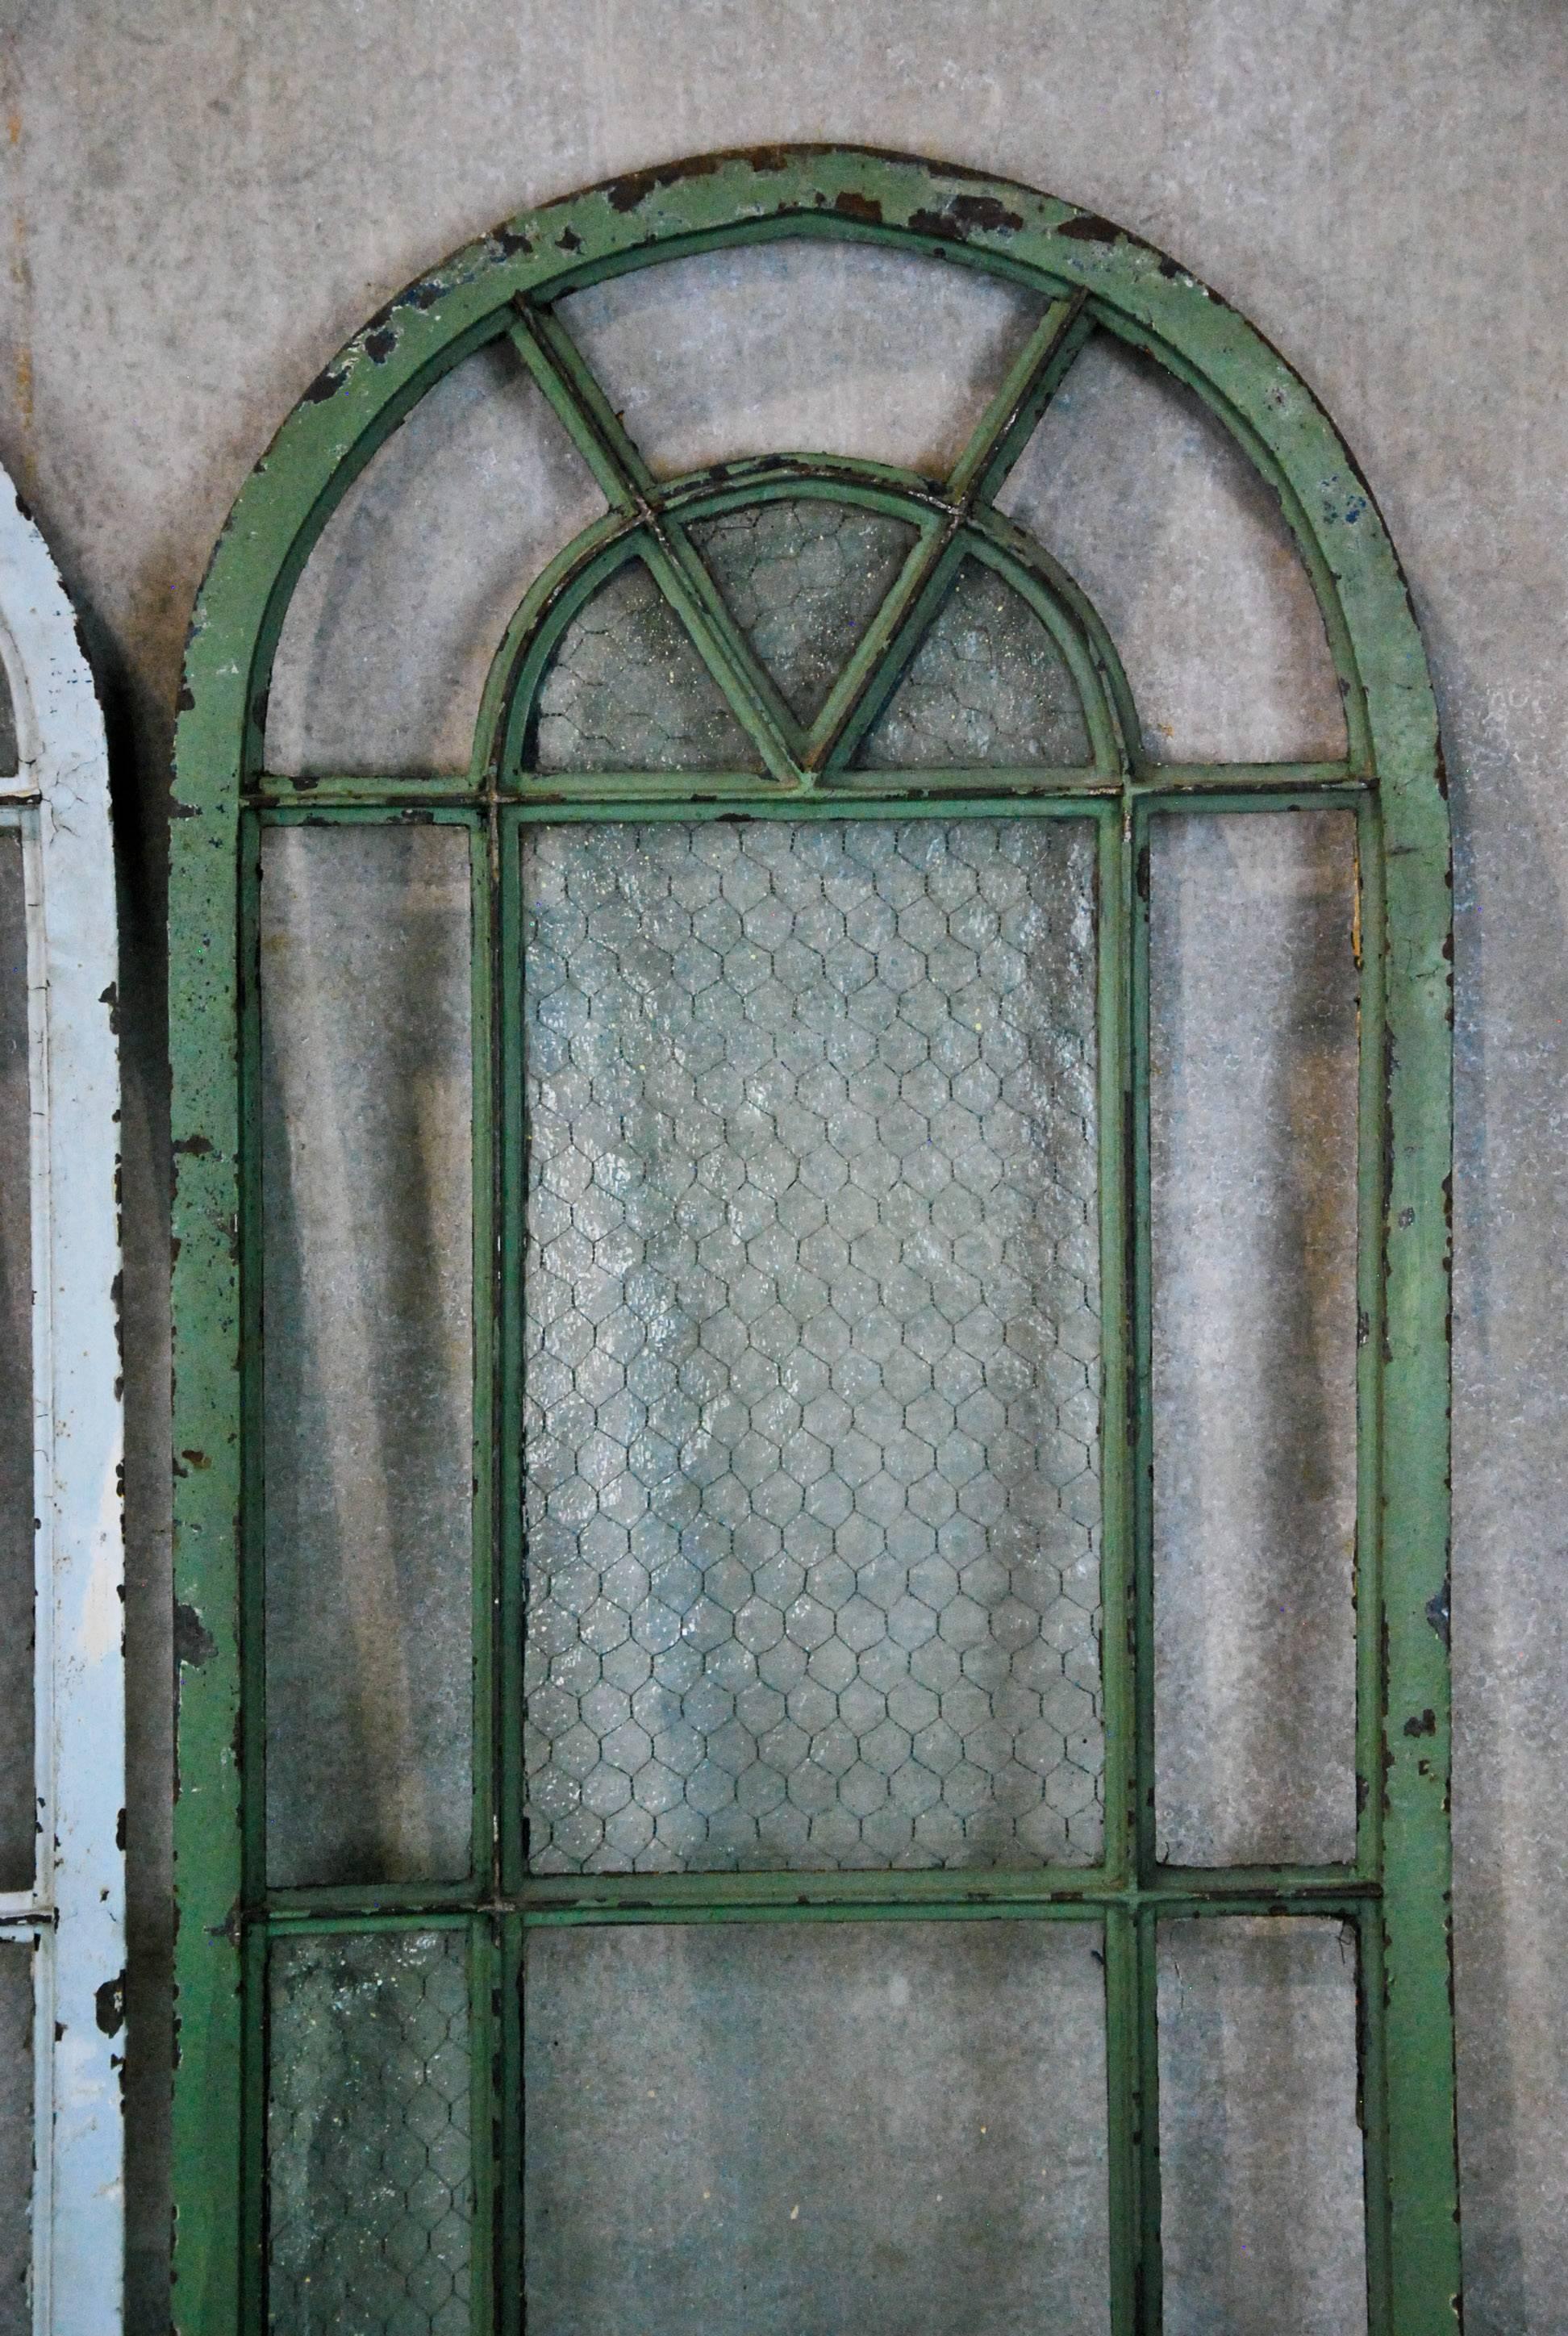 Very unique set of factory windows as found with some original chicken wire glass in place. The set of three are a rare narrow configuration with unique details.
They were found in an old storage building outside Brooklyn, NY.

Please note. we